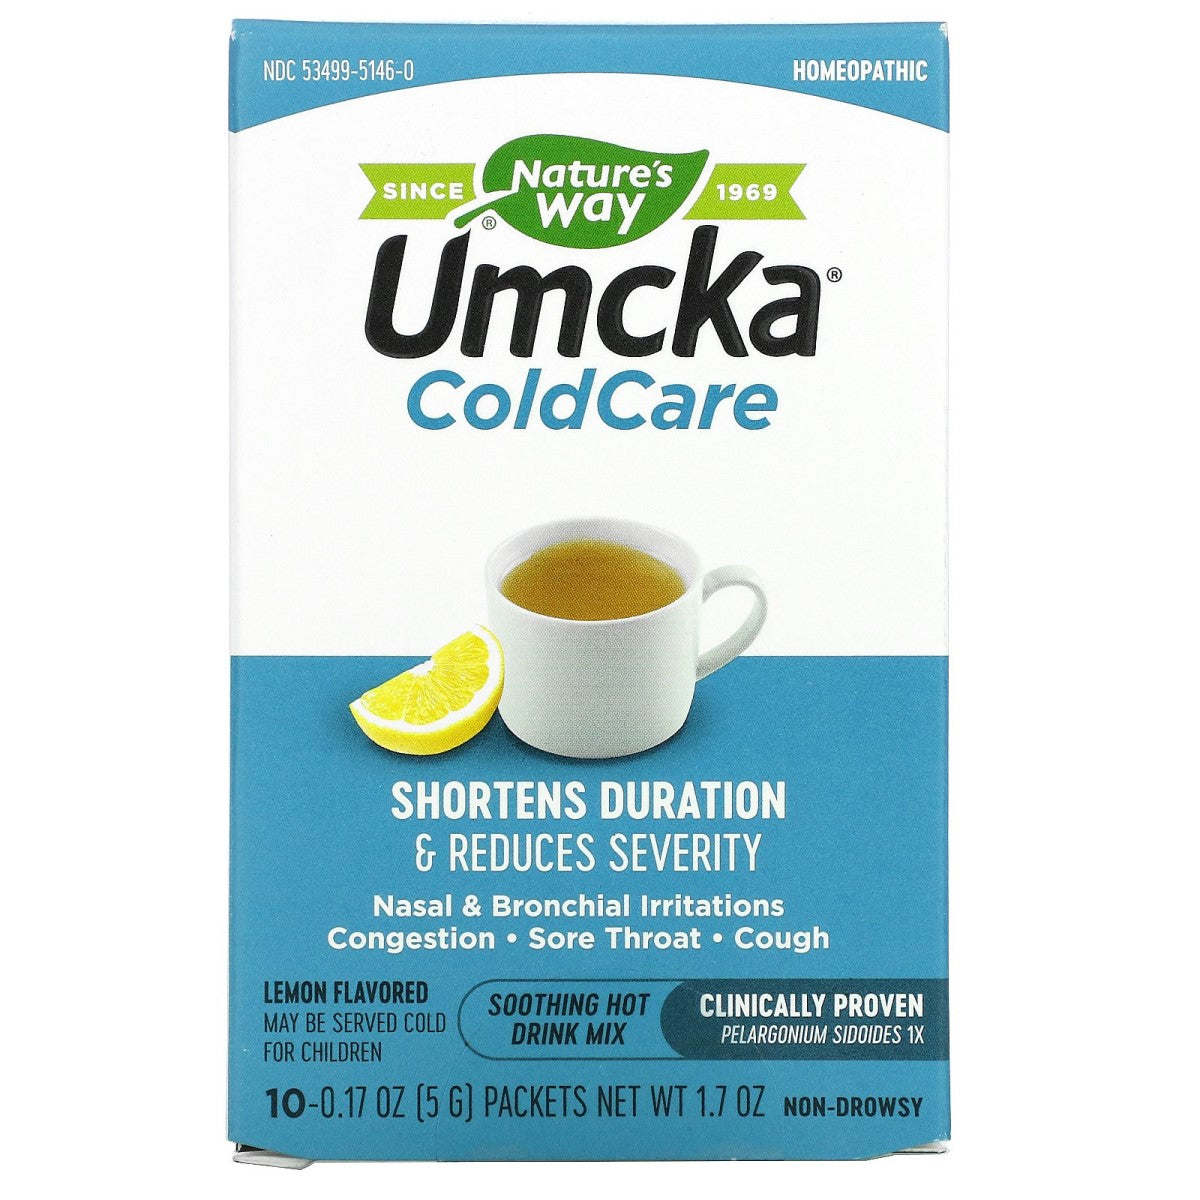 Primary image of Umcka ColdCare Soothing Hot Drink (Lemon)